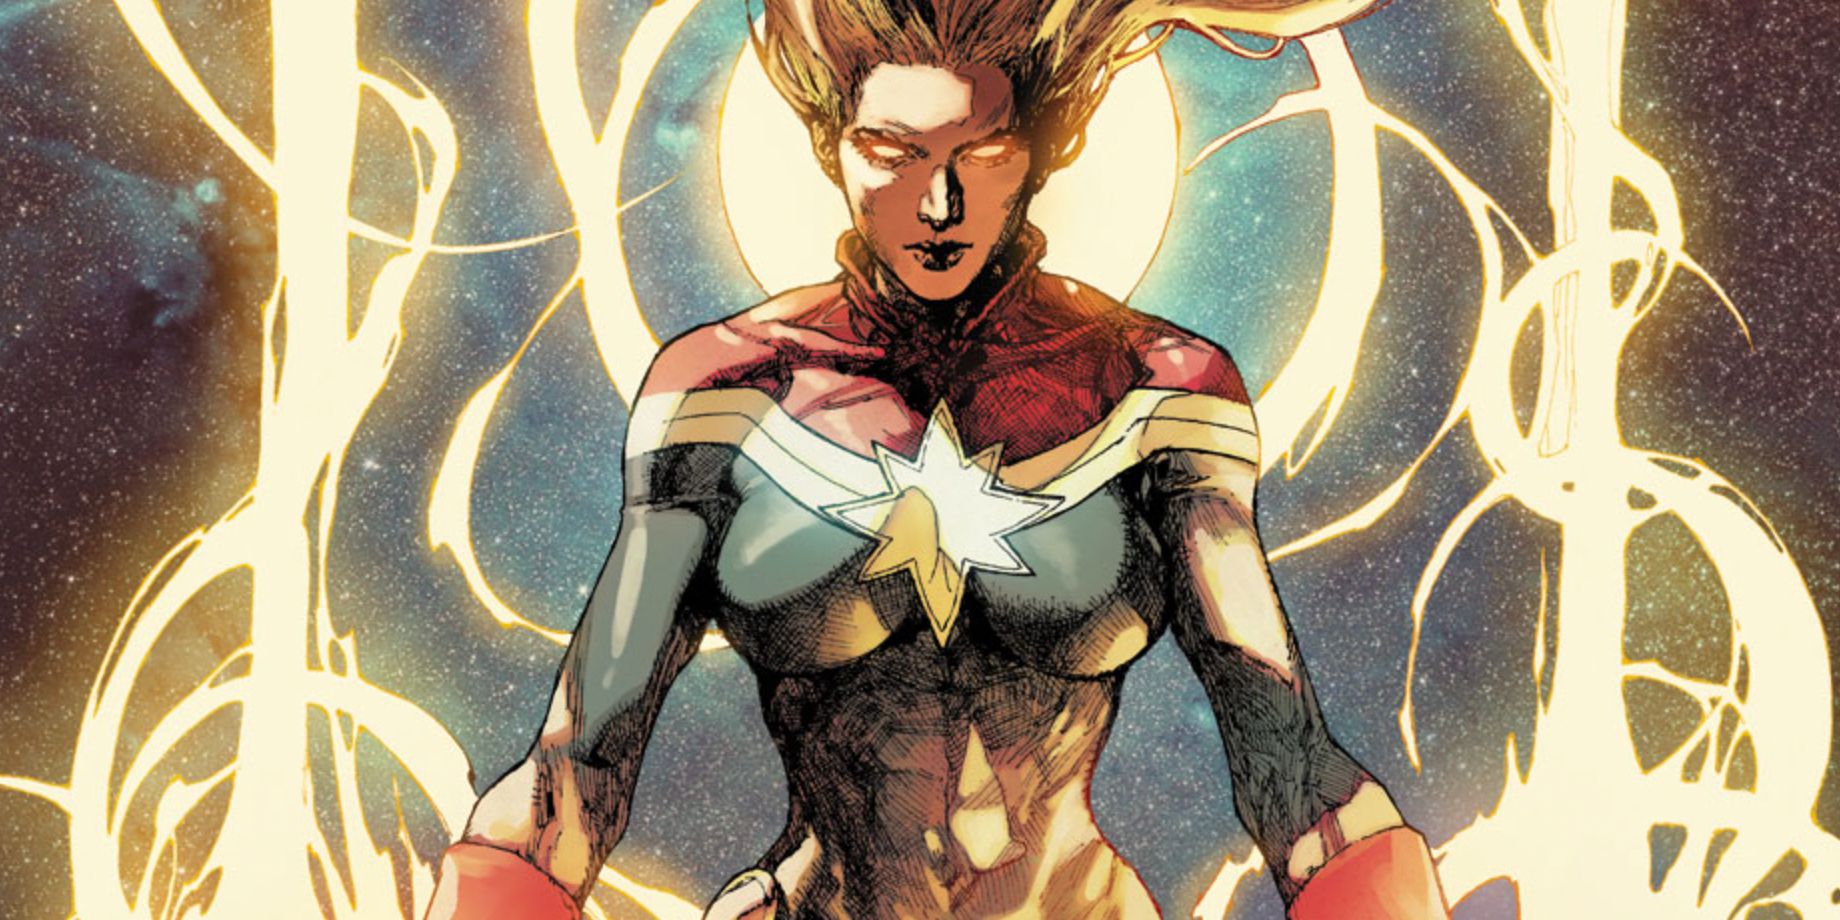 Carol Danvers surrounded by energy as Captain Marvel in Marvel Comics